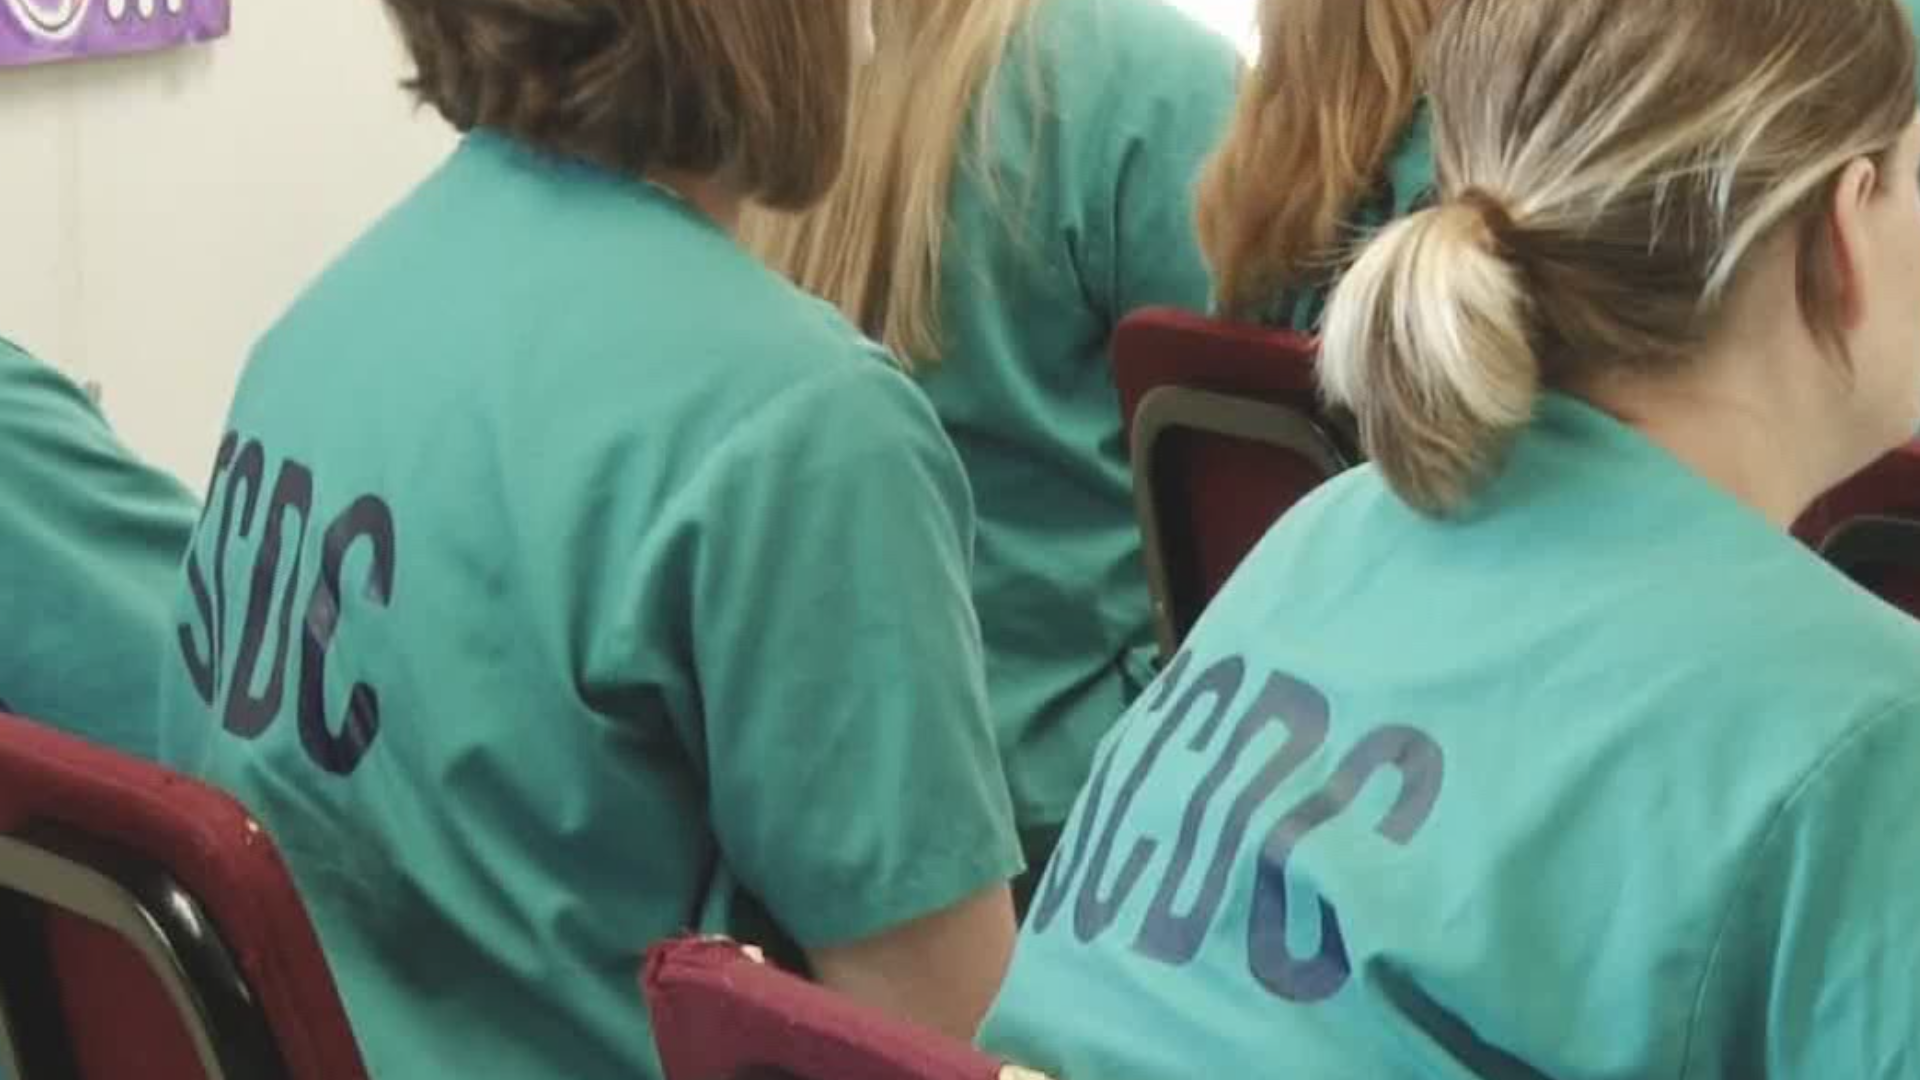 Women serving time at a local correctional institution - can soon learn how to code.